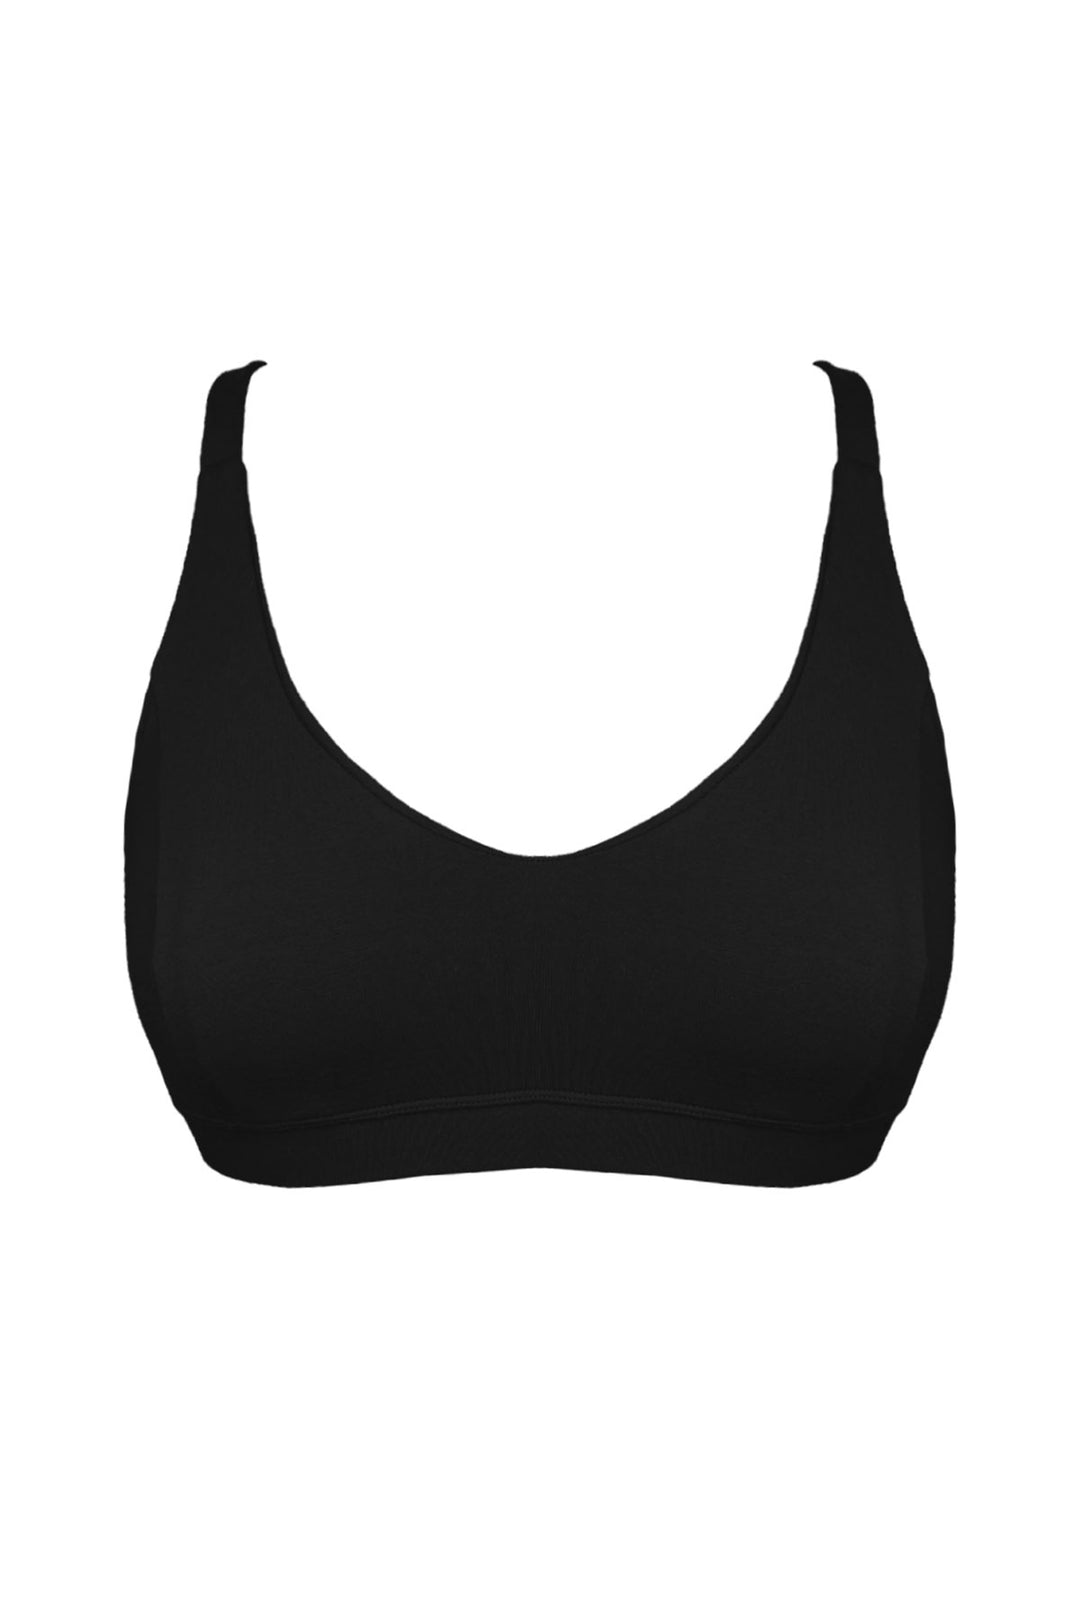 Siane Full Cup Bralette for C-DD cup